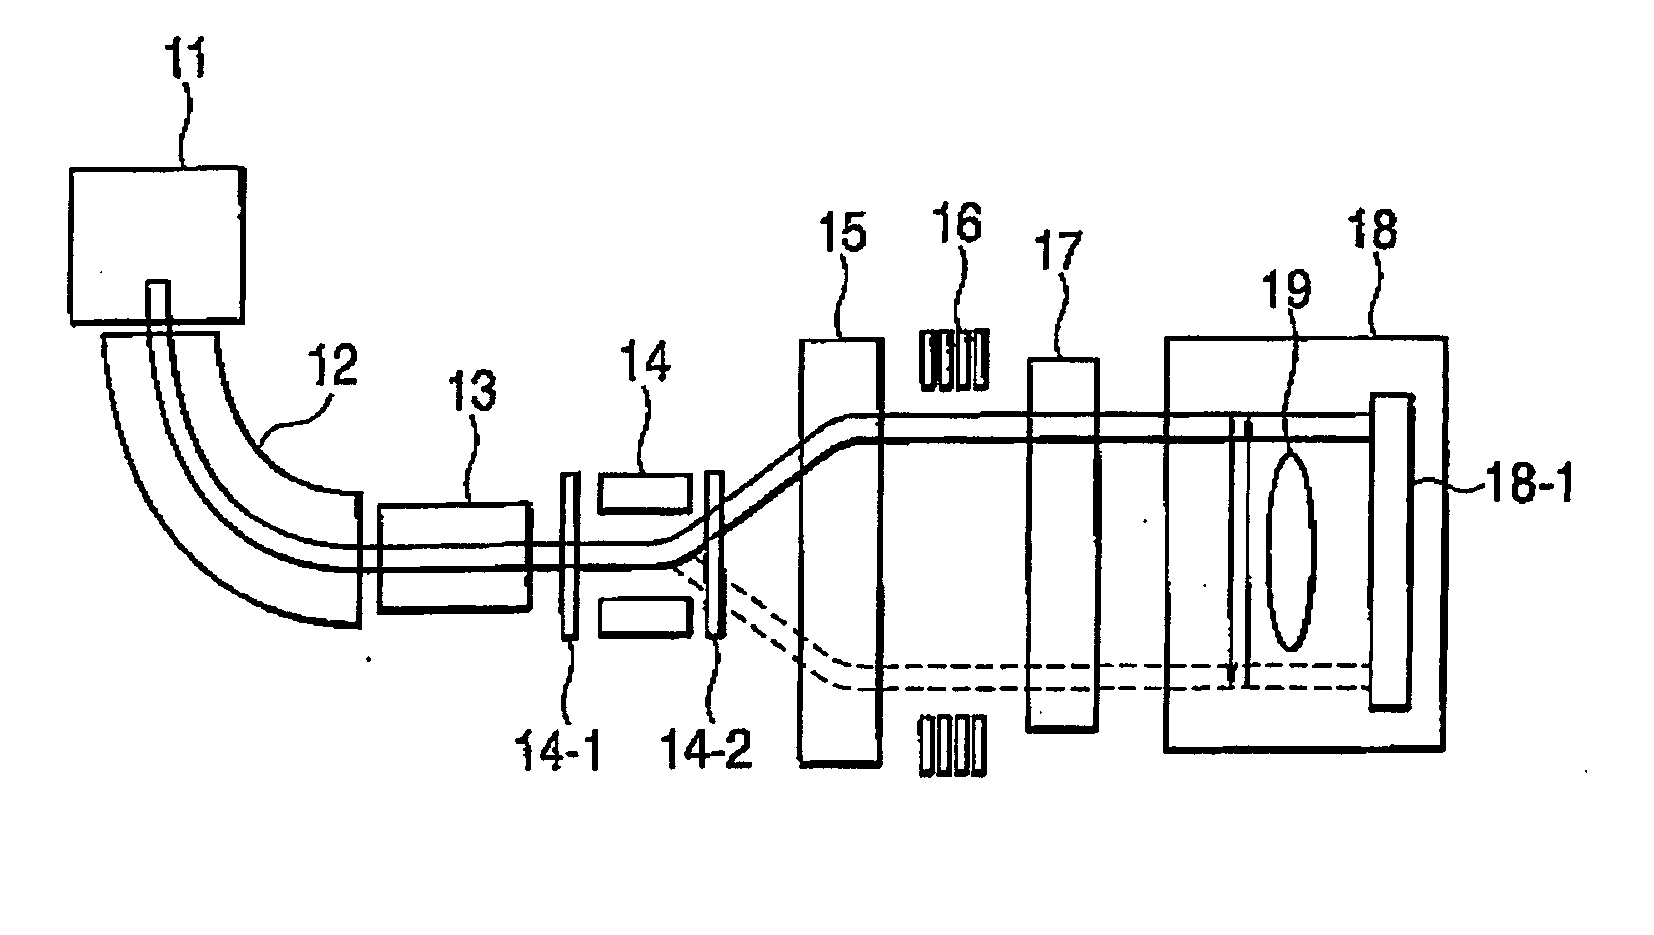 Irradiation system with ion beam/charged particle beam